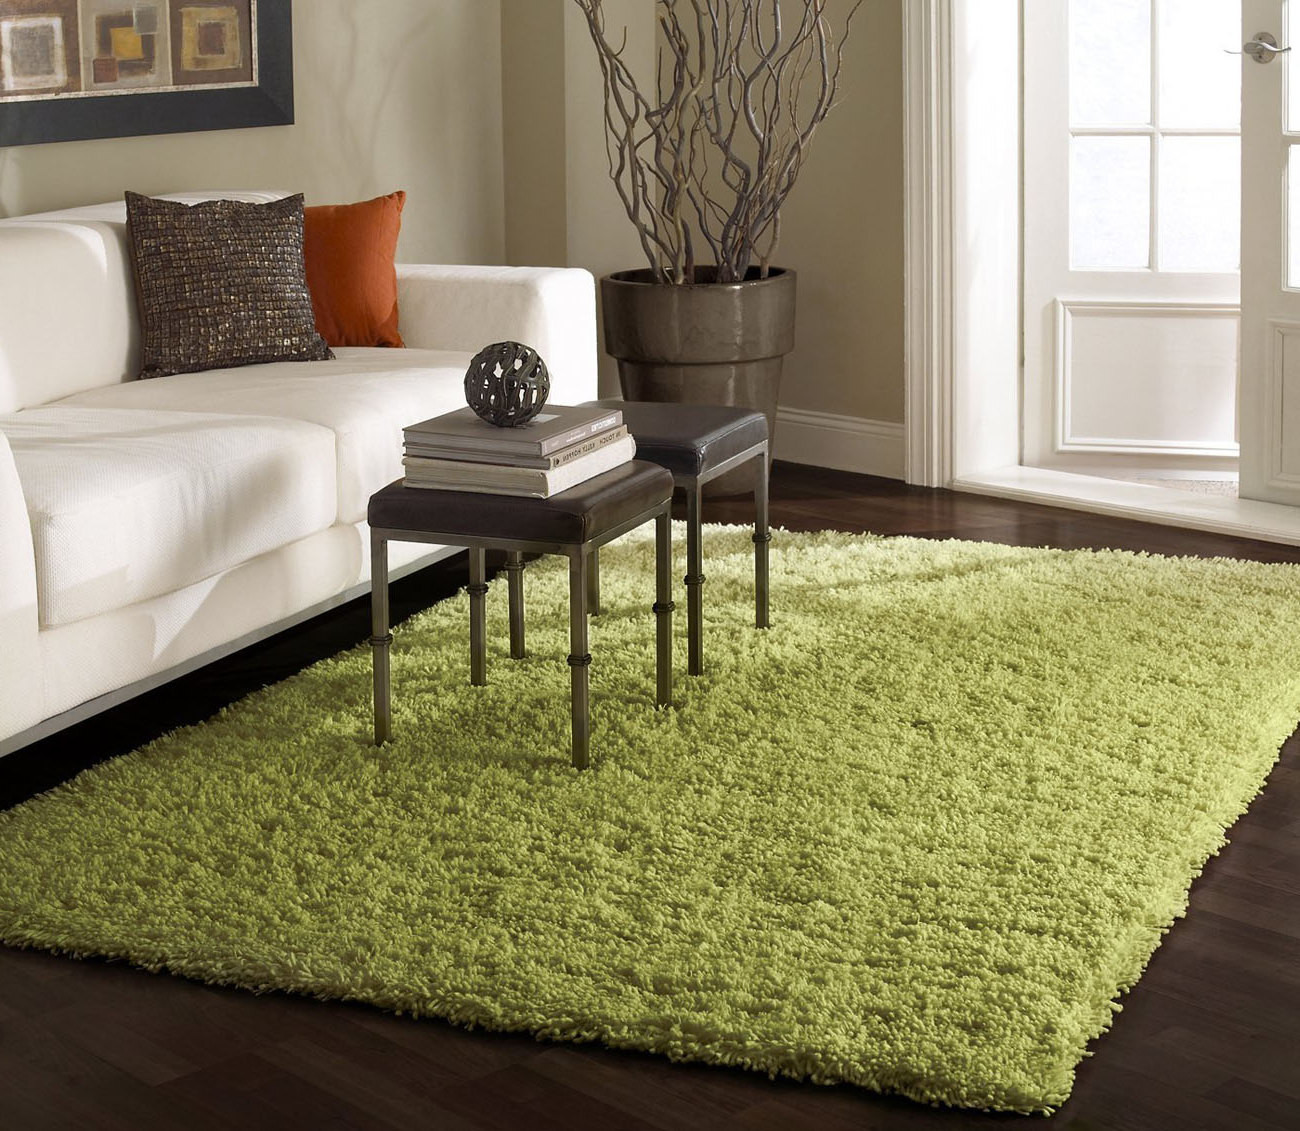 Accent Rugs For Living Room
 Rugs for Cozy Living Room Area Rugs Ideas